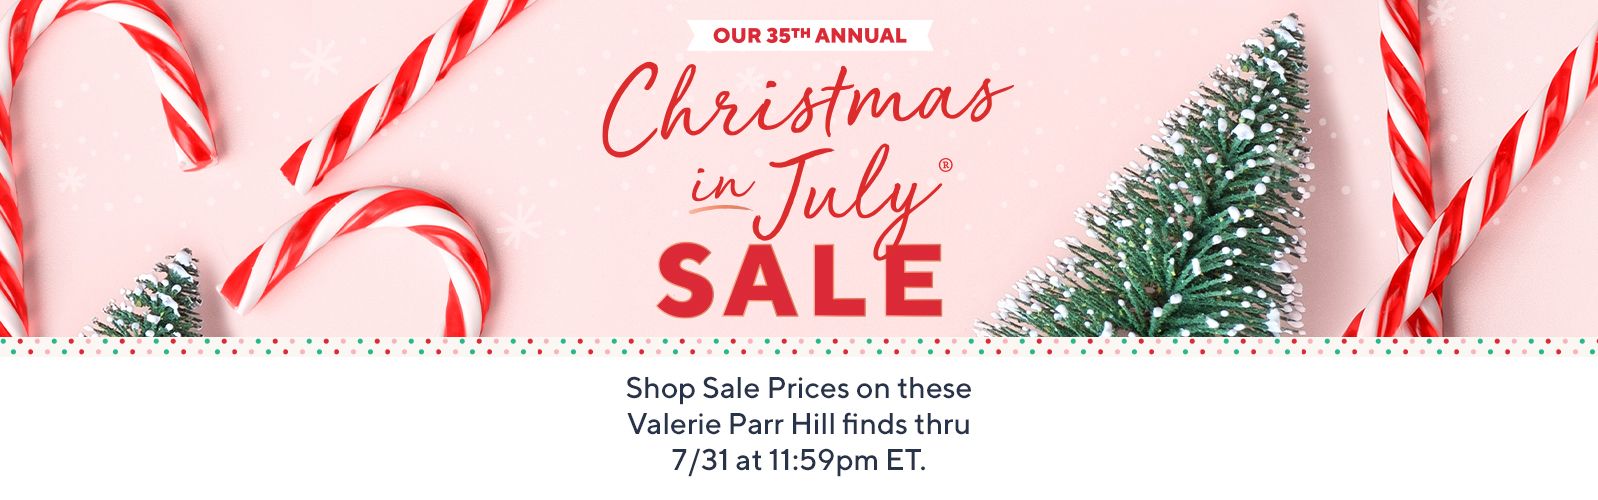  Christmas in July  Sale Shop Sale Prices on these Valerie Parr Hill finds thru 7/31 at 11:59pm ET.